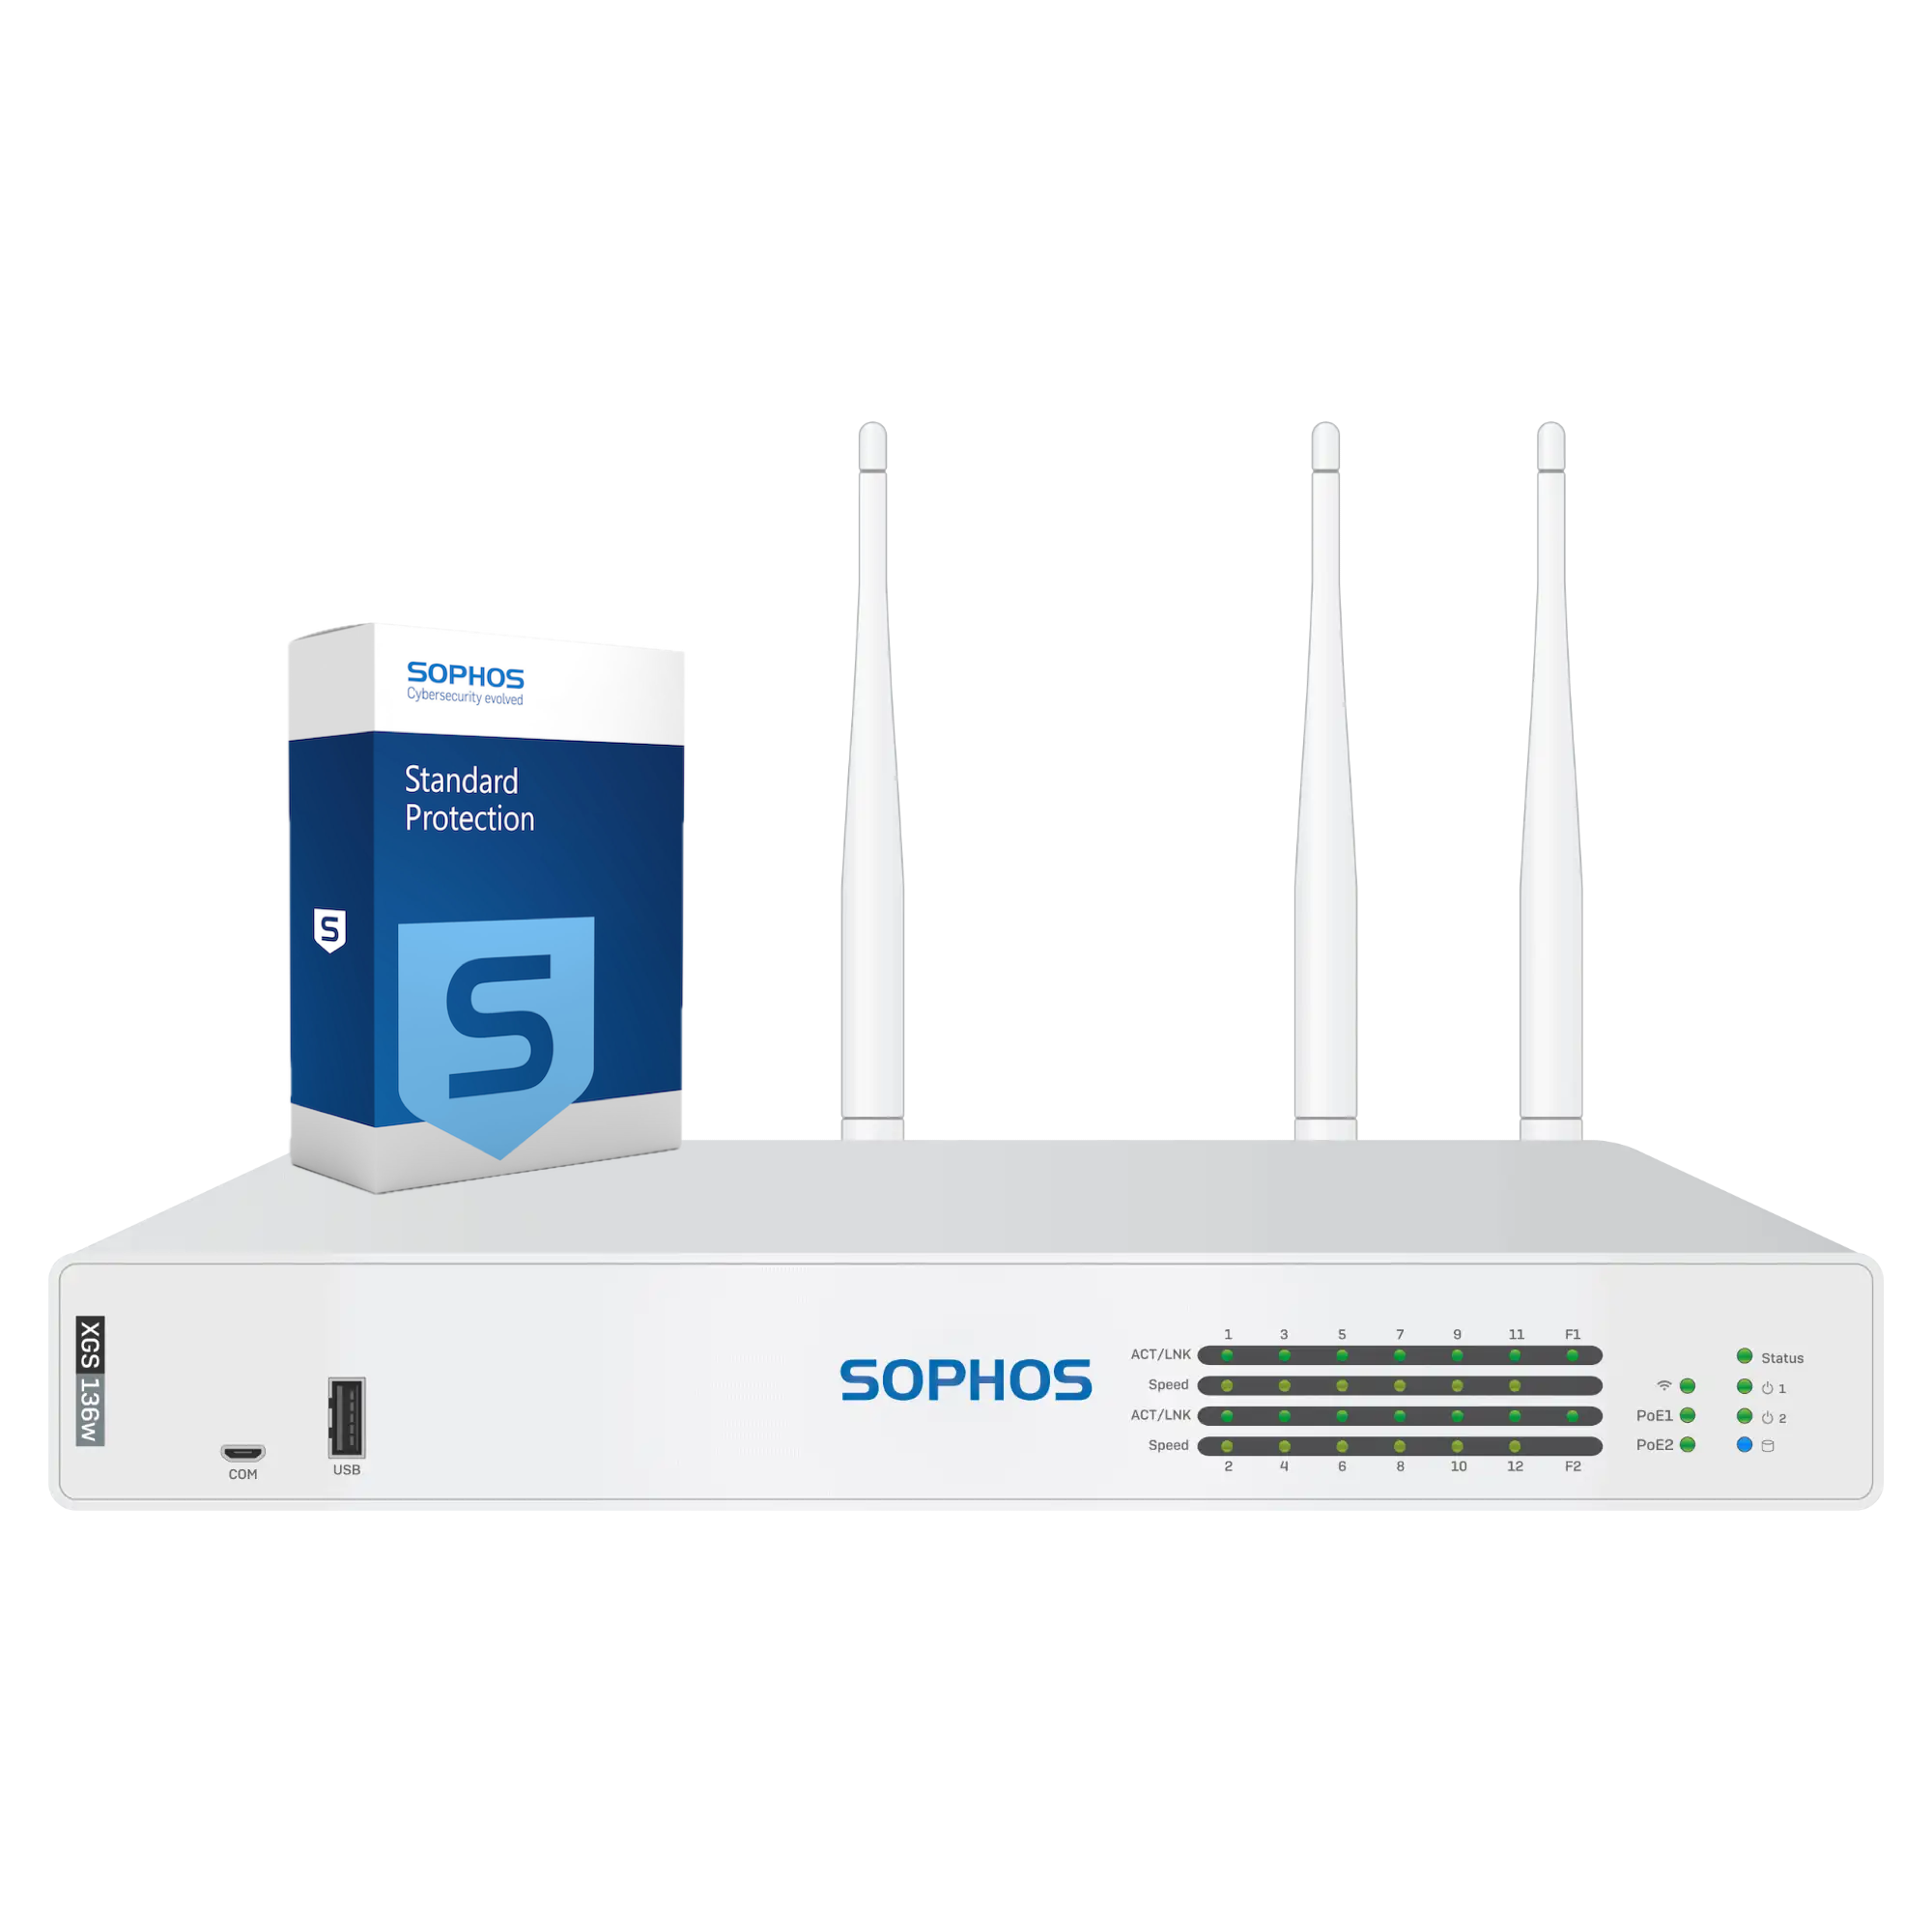 Sophos XGS 136w Firewall with Standard Protection, 1-year - EU power cord